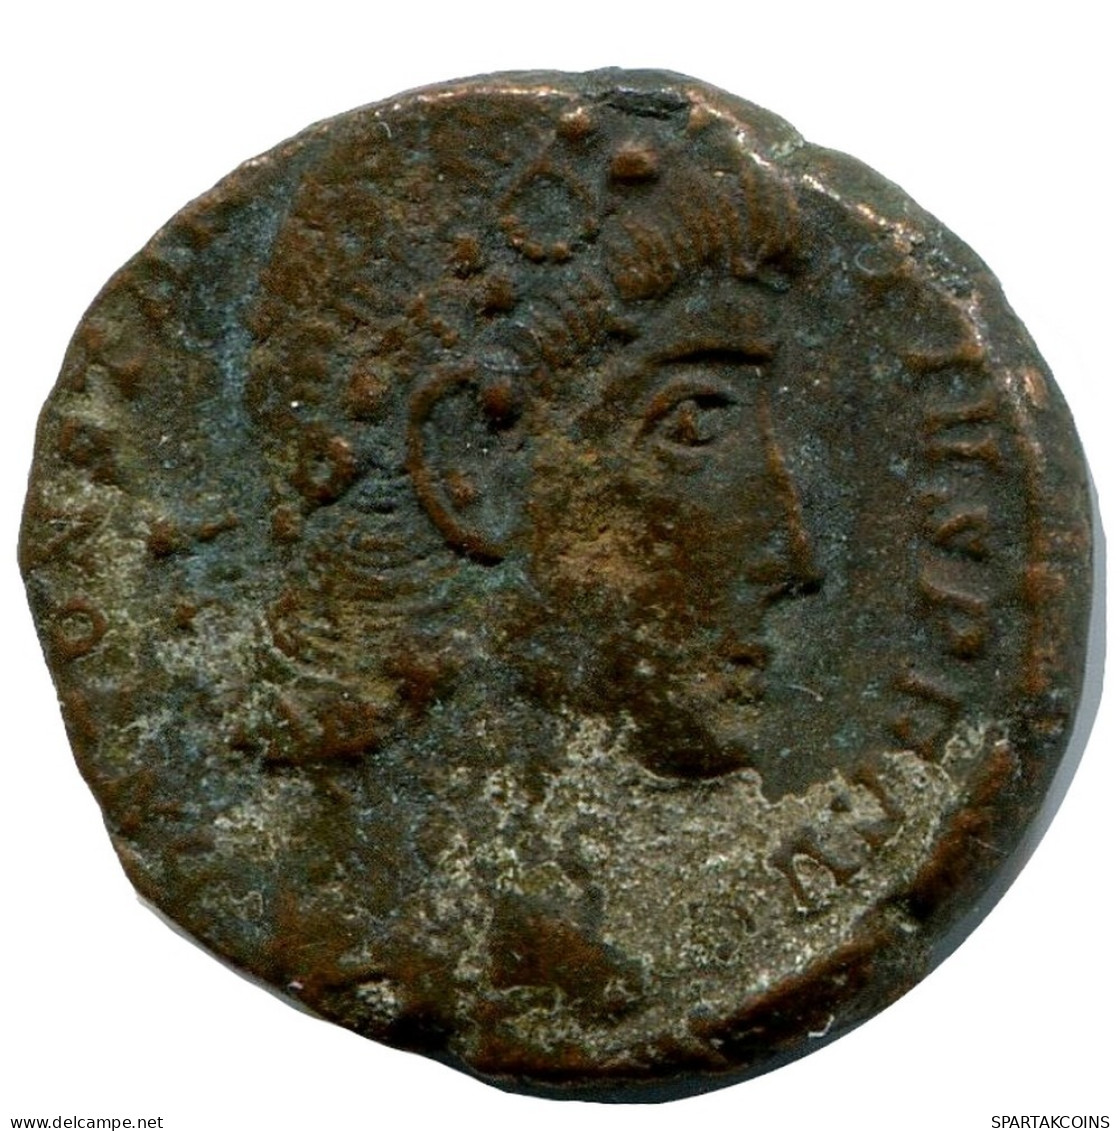 CONSTANTIUS II MINT UNCERTAIN FROM THE ROYAL ONTARIO MUSEUM #ANC10042.14.F.A - El Impero Christiano (307 / 363)